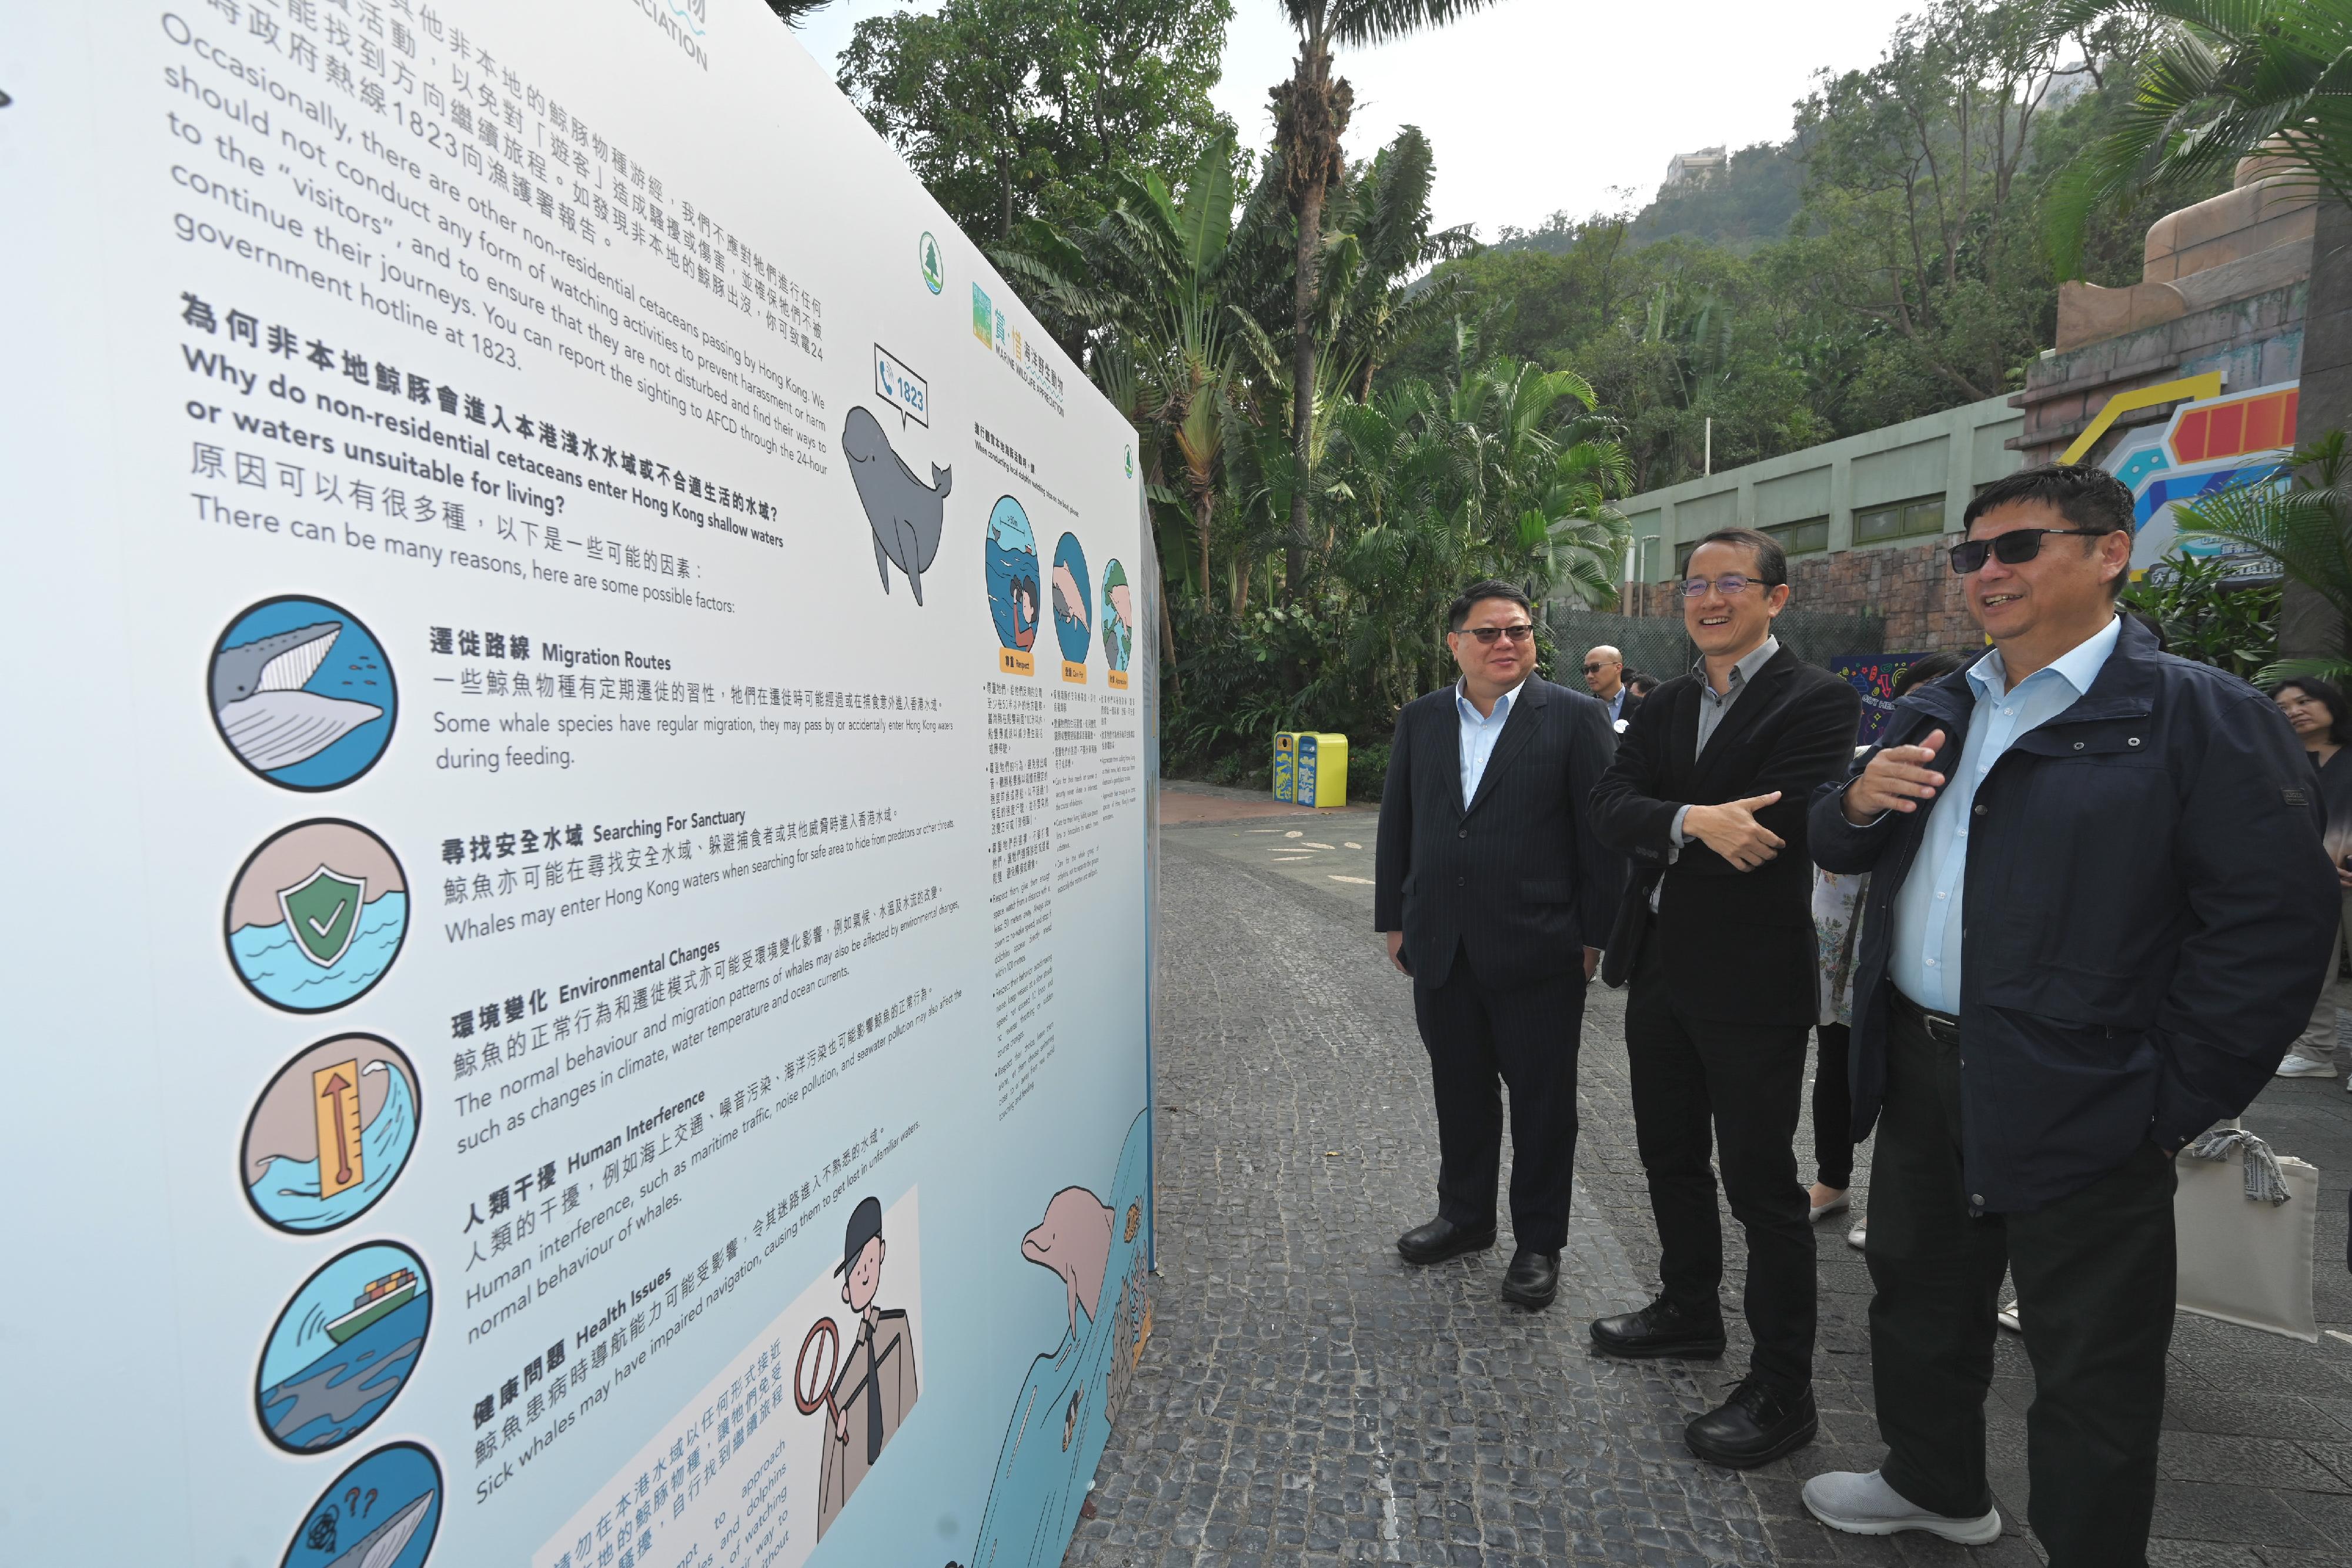 The Marine Wildlife Appreciation Festival organised by the Agriculture, Fisheries and Conservation Department (AFCD) was launched today (January 11), with a view to promoting respect, care, and appreciation for marine wildlife among the public. Photo shows the AFCD Assistant Director (Fisheries and Marine Conservation), Mr Patrick Lai (second right), and other guests viewing exhibition panels.